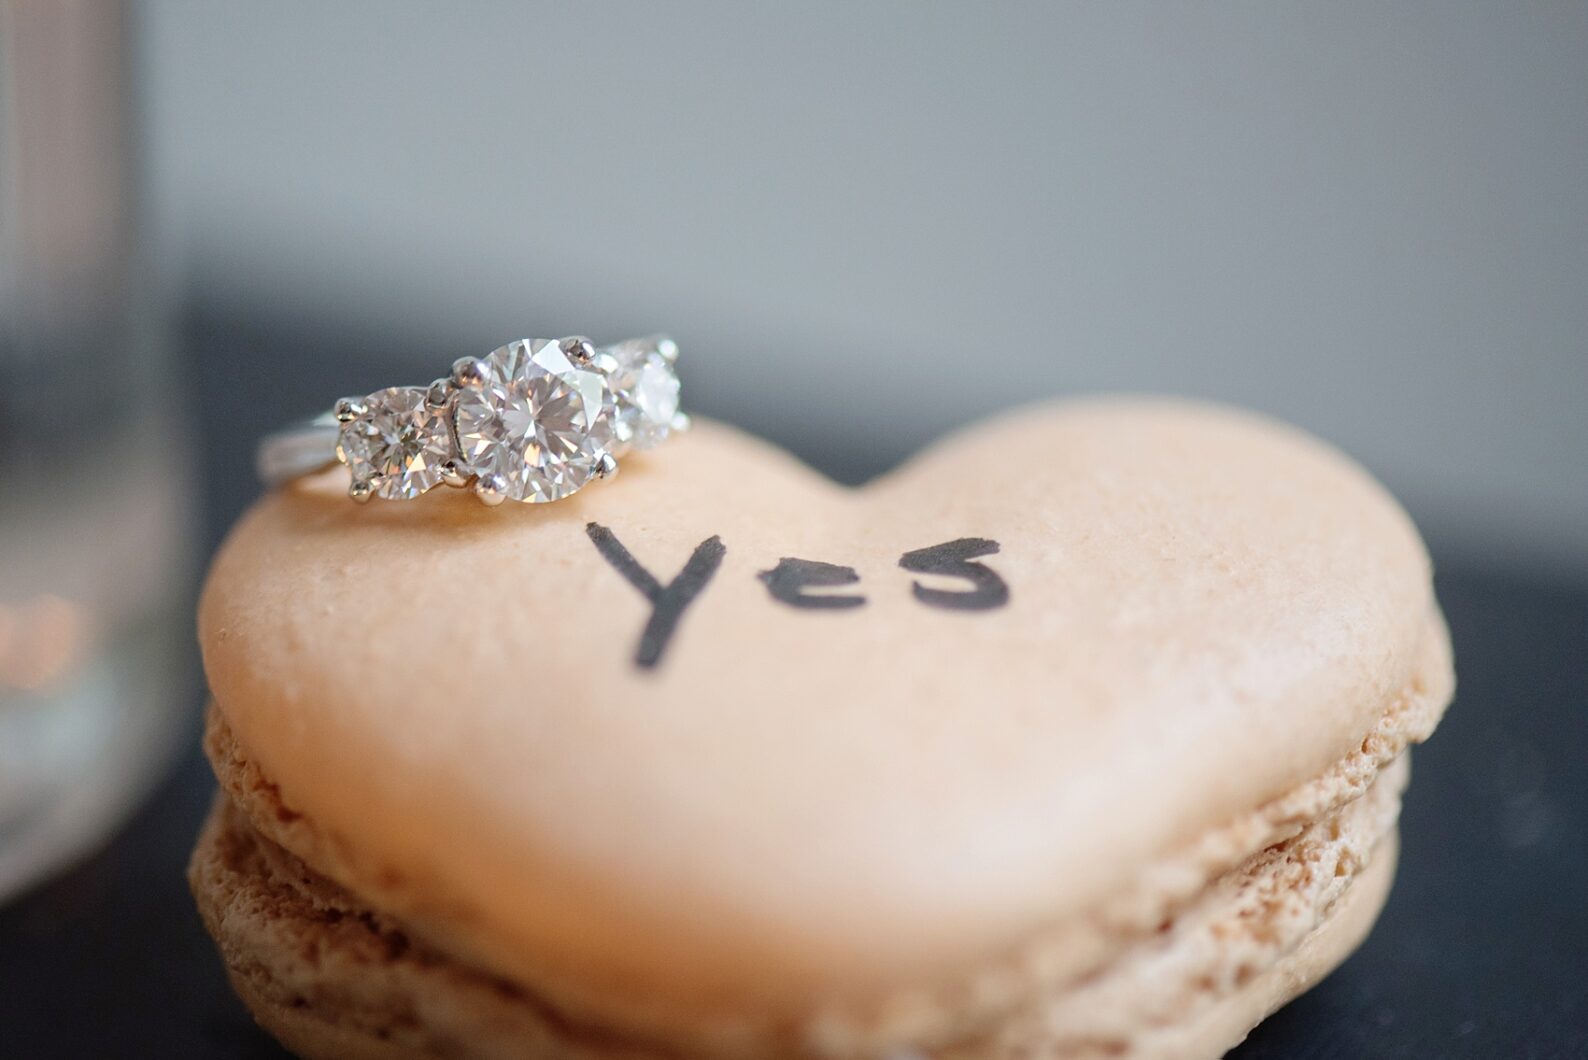 "Yes" peach heart macaron for a NYC Proposal in Chelsea, Haven's Kitchen. Three round diamond engagement ring, with photos by NYC wedding photographer Mikkel Paige. Flowers by The Arrangement, planning by Brilliant Event Planning.